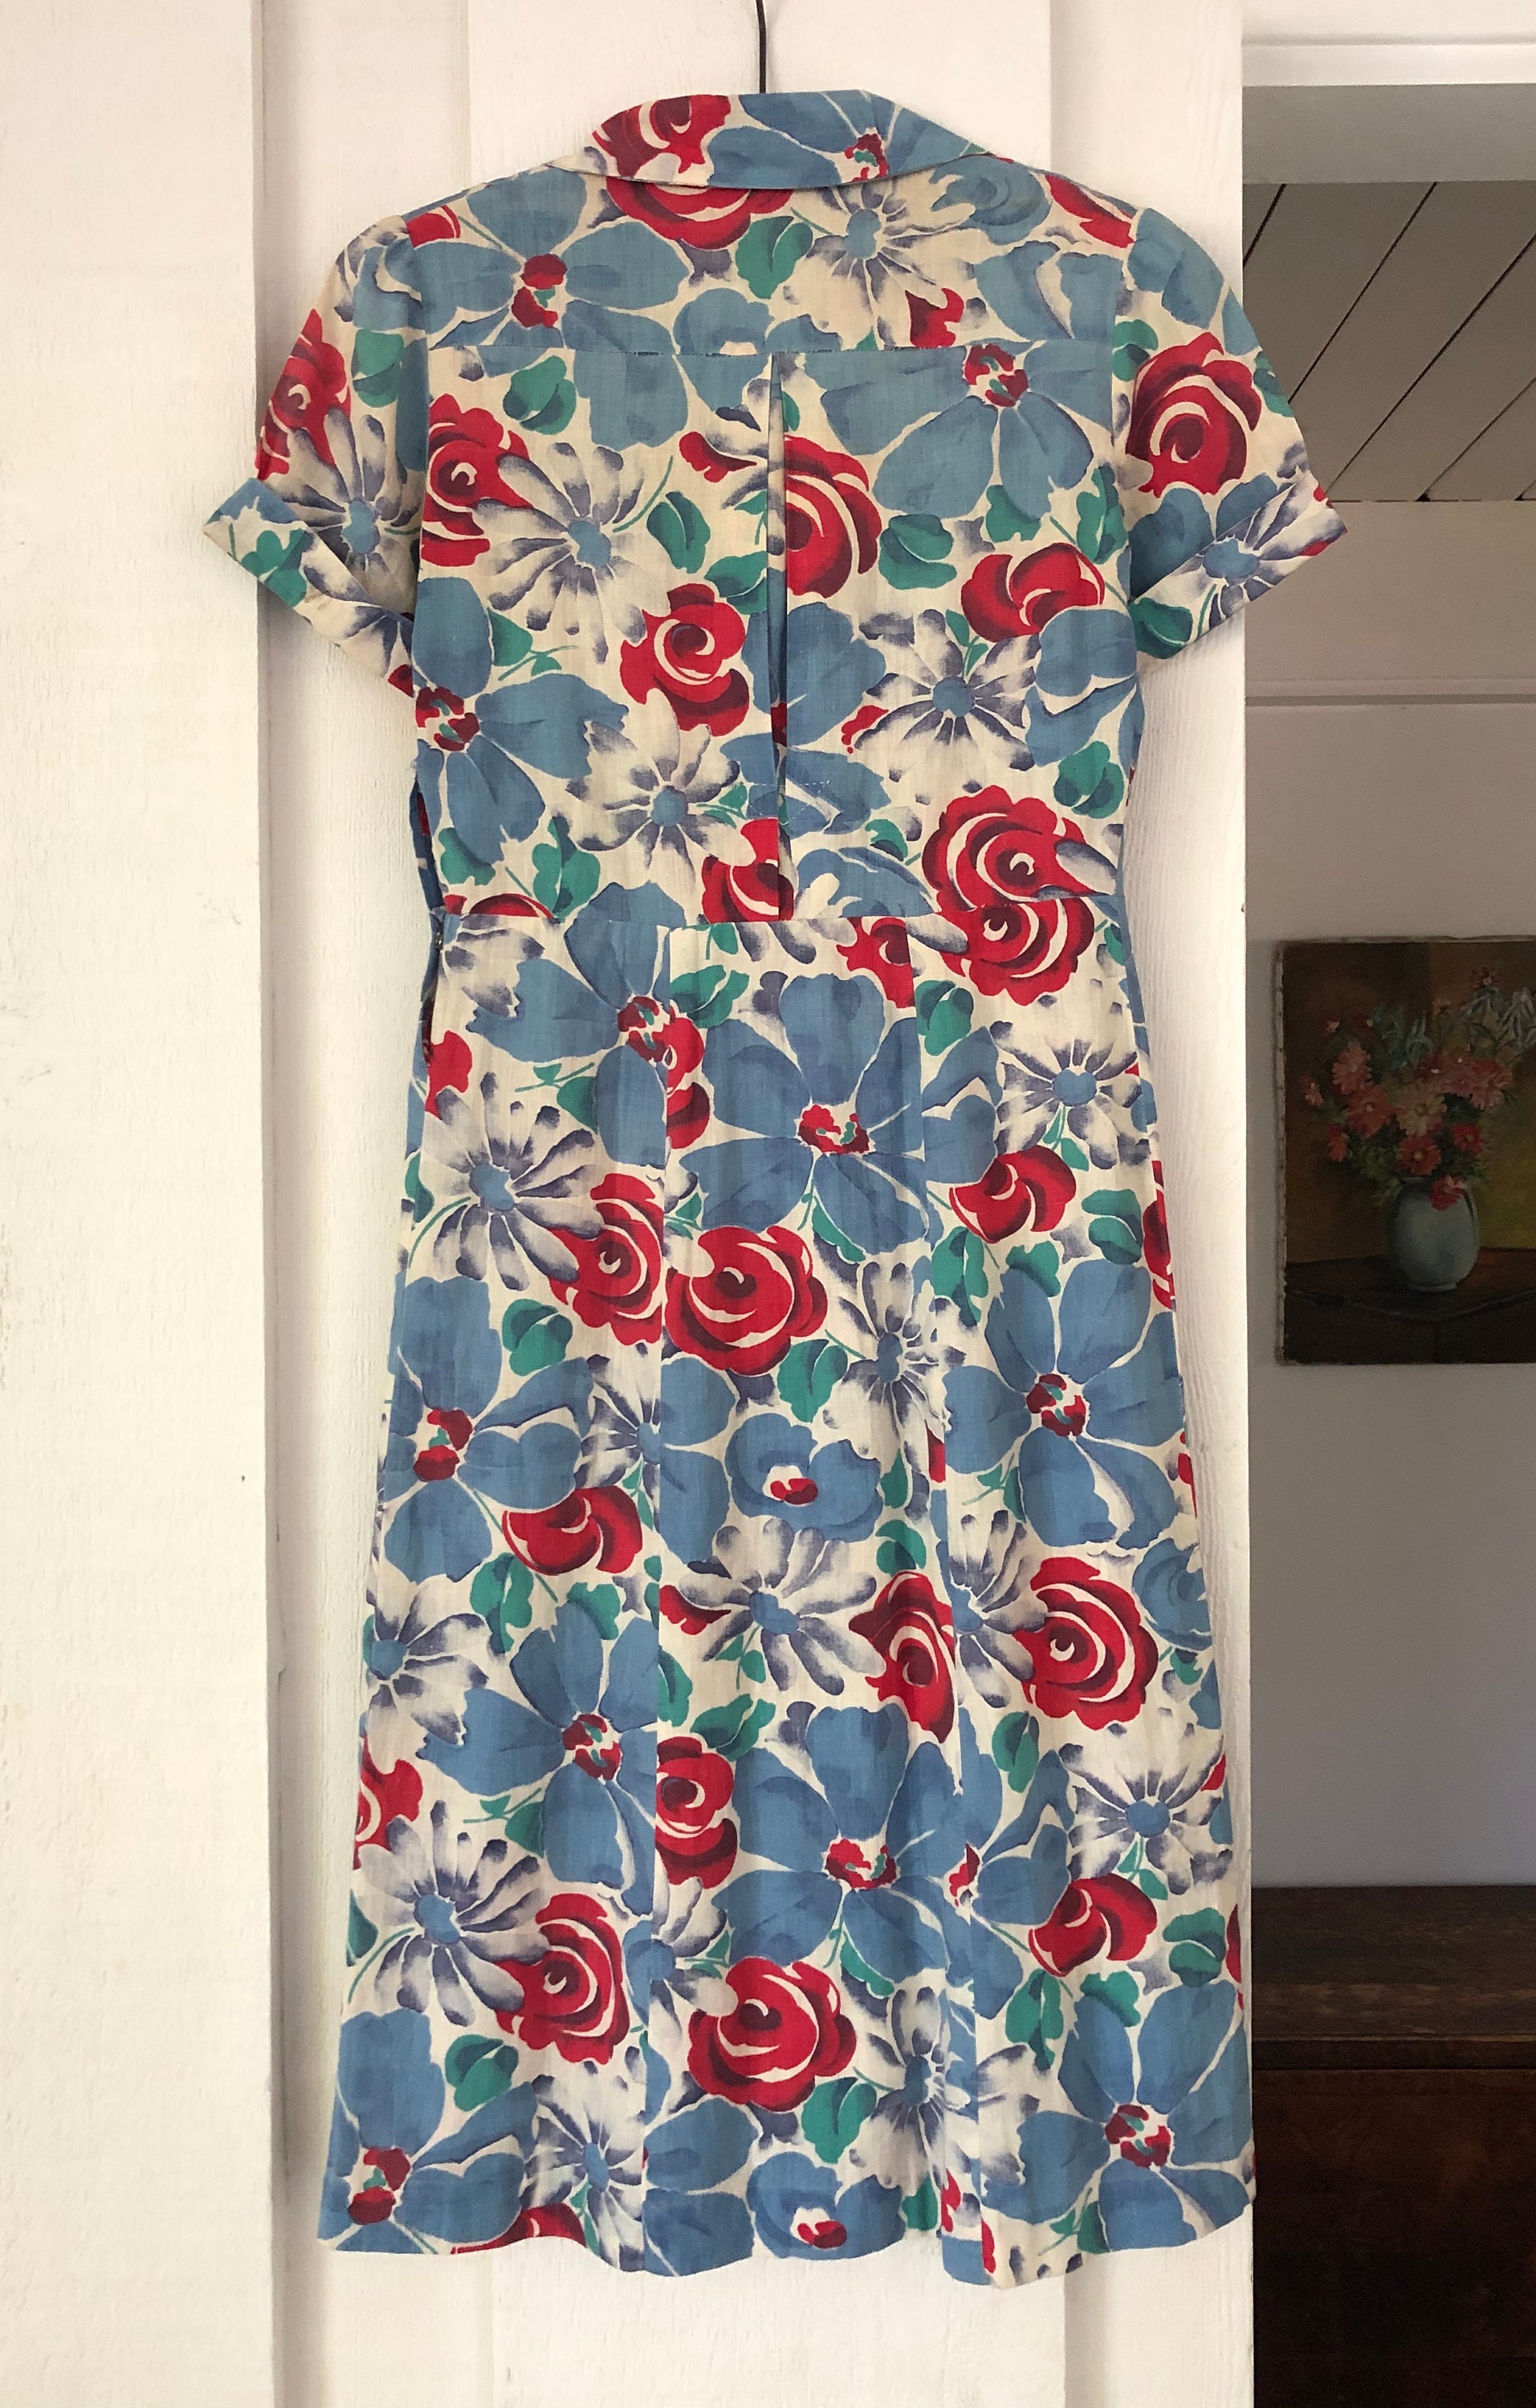 Vintage 1940s floral dress rose and periwinkle blue woven | Etsy